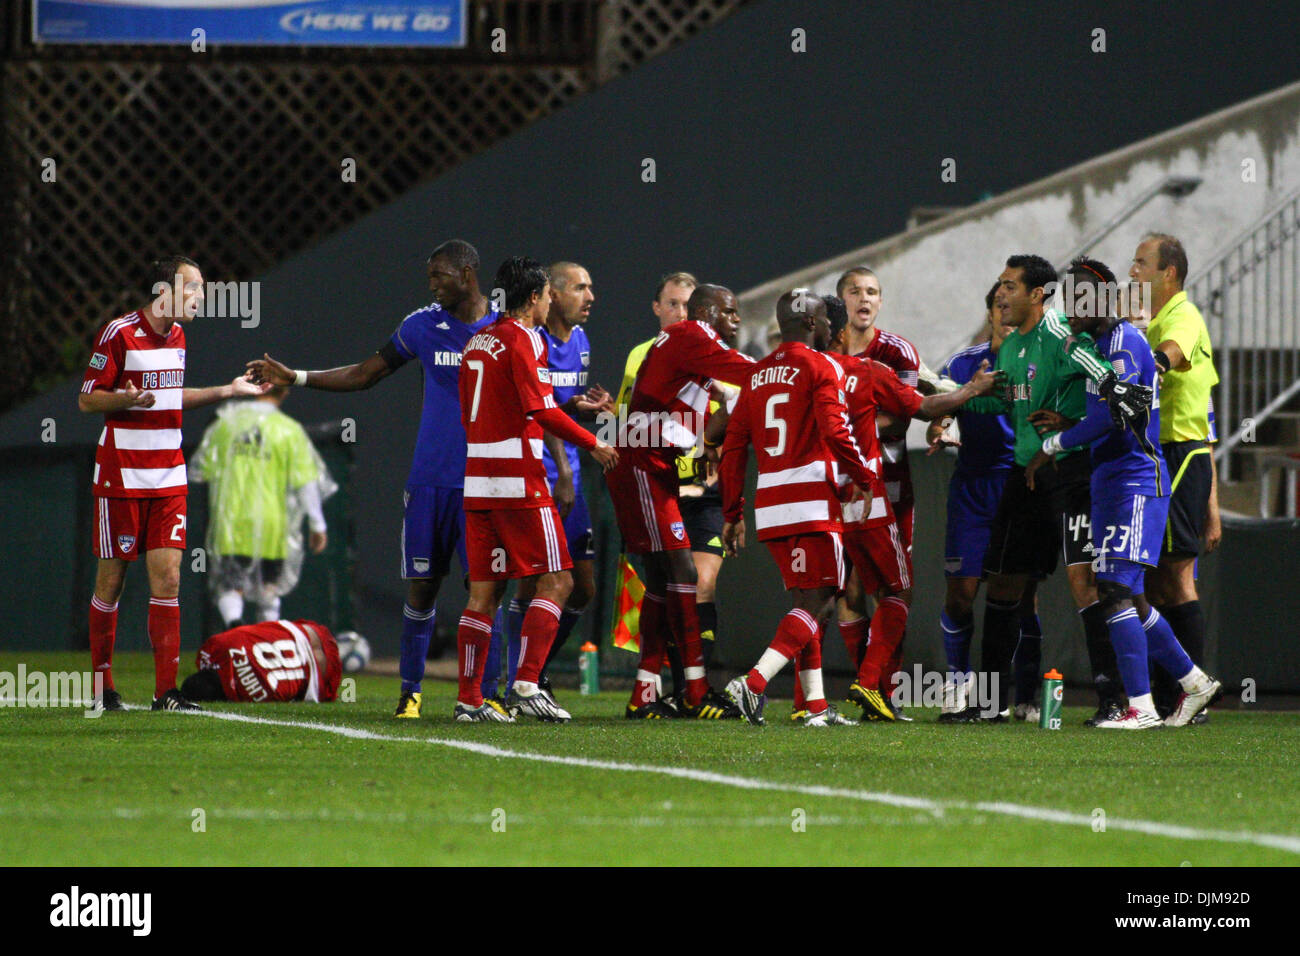 Sept. 25, 2010 - Kansas City, Kansas, United States of America - Kansas City and FC Dallas players get together after a foul on Marvin Chavez #18 by Michael Harrington #2. FC Dallas defeated the Kansas City Wizards 3-1 at CommunityAmerica Ballpark. (Credit Image: © Tyson Hofsommer/Southcreek Global/ZUMApress.com) Stock Photo